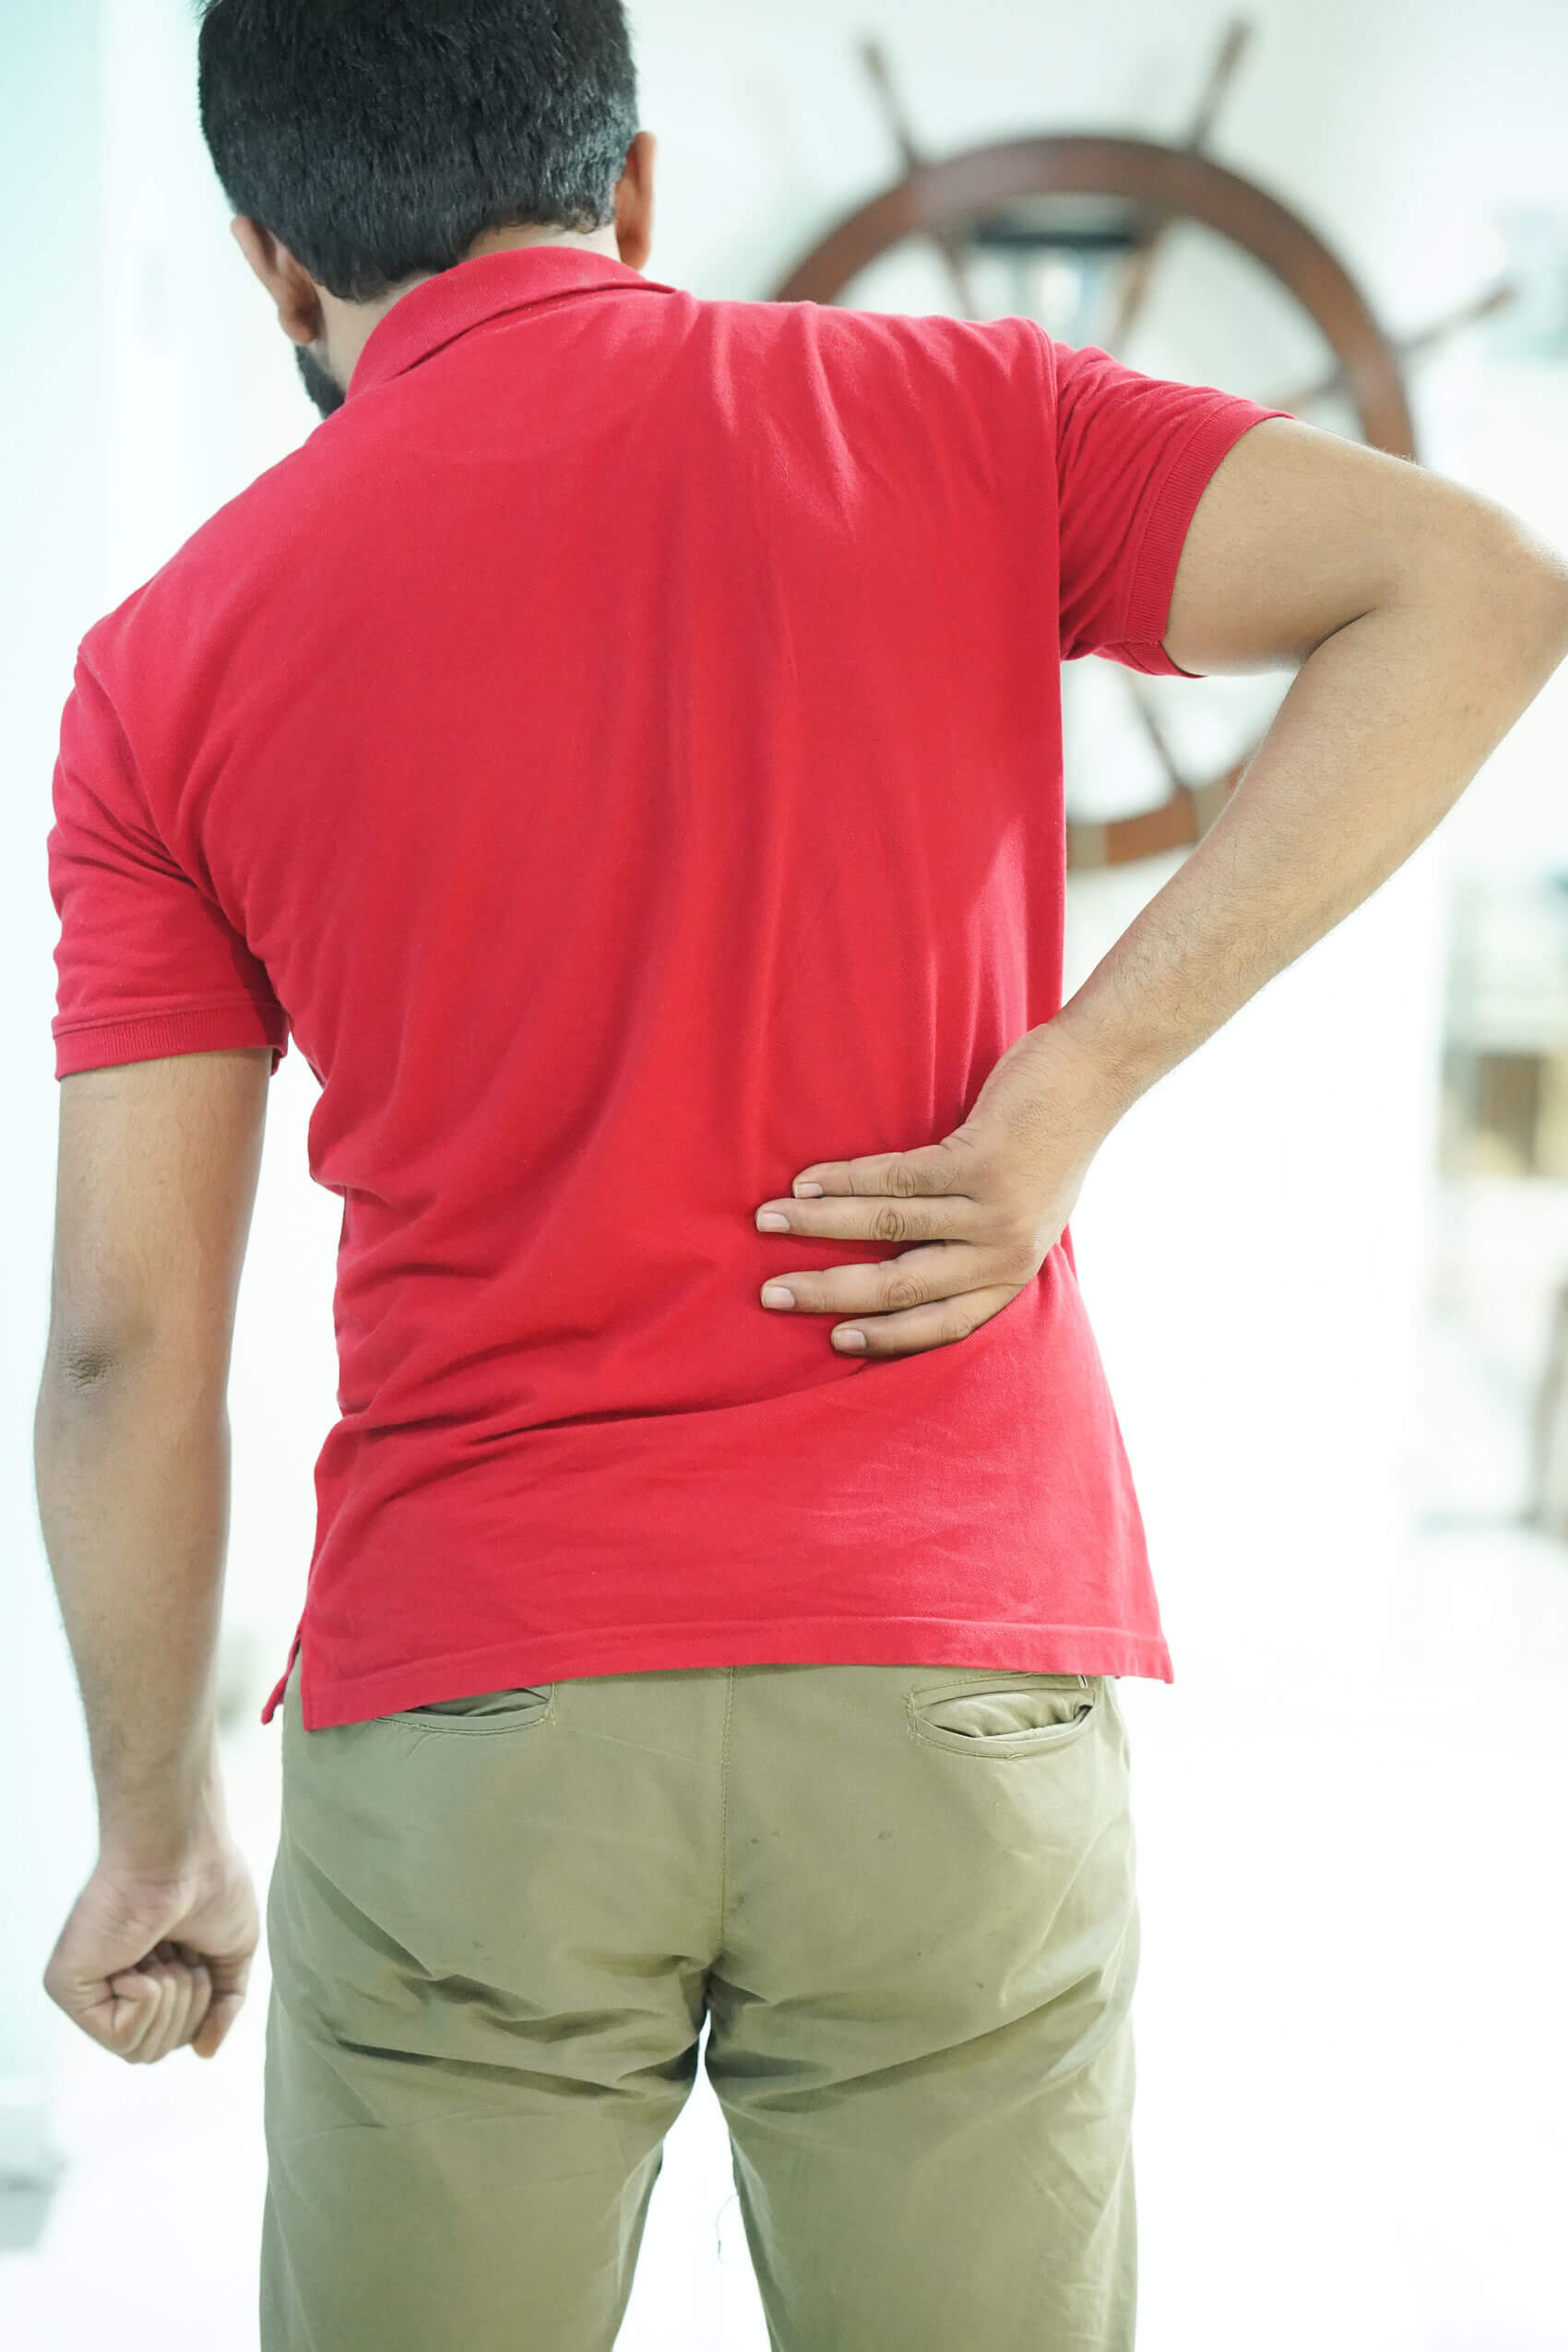 Mid Back Pain Treatment In Islamabad